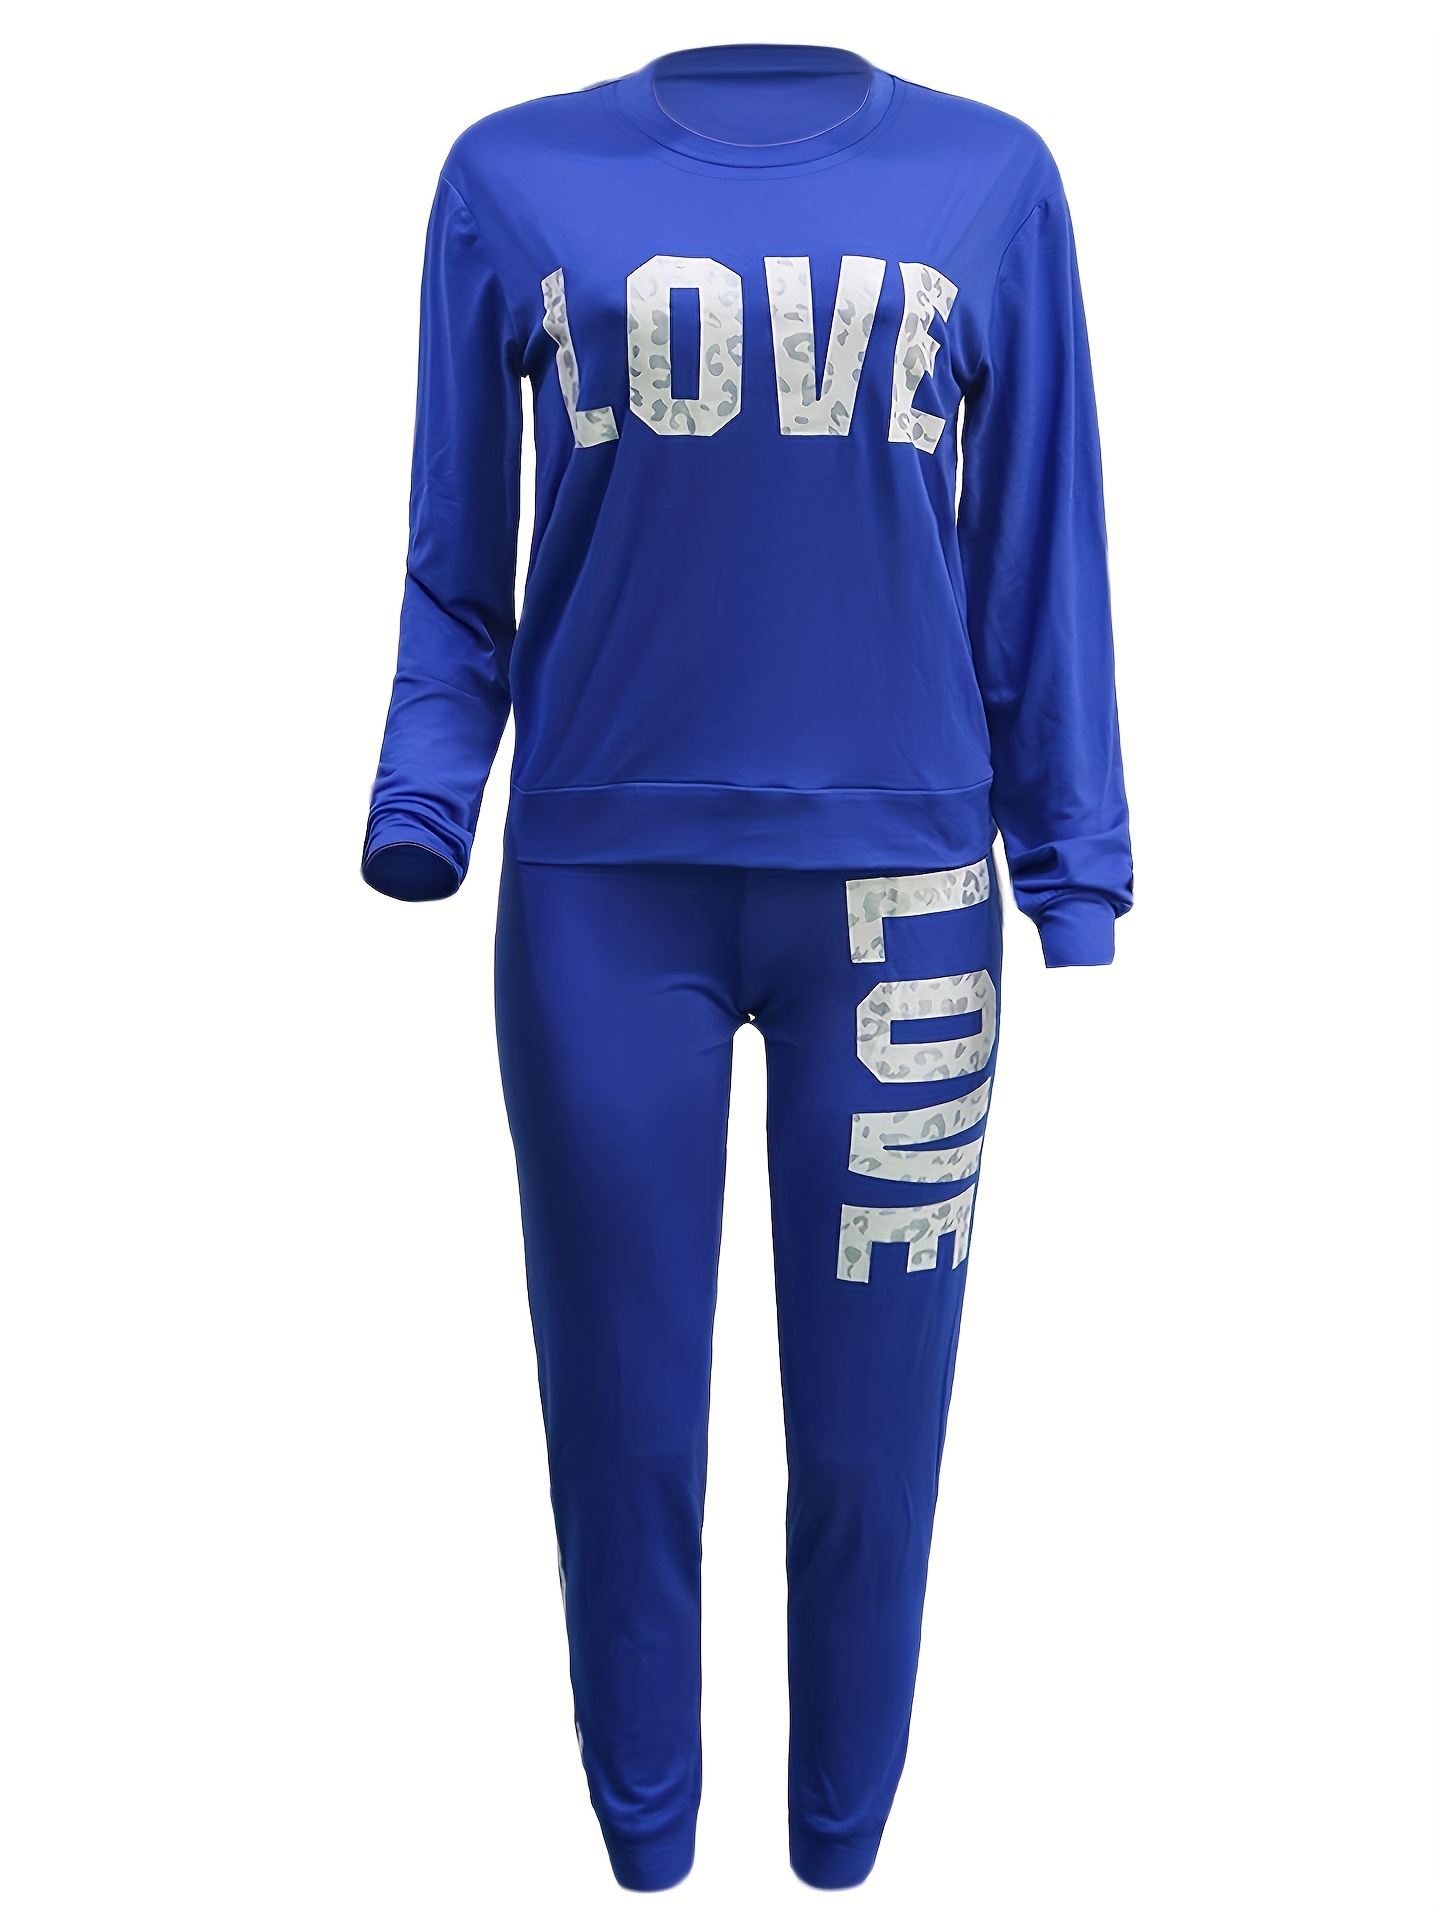 Oversized Womens Two Piece Tracksuit Set In For Casual And Sport Wear In  Autumn From Blueegg, $15.43